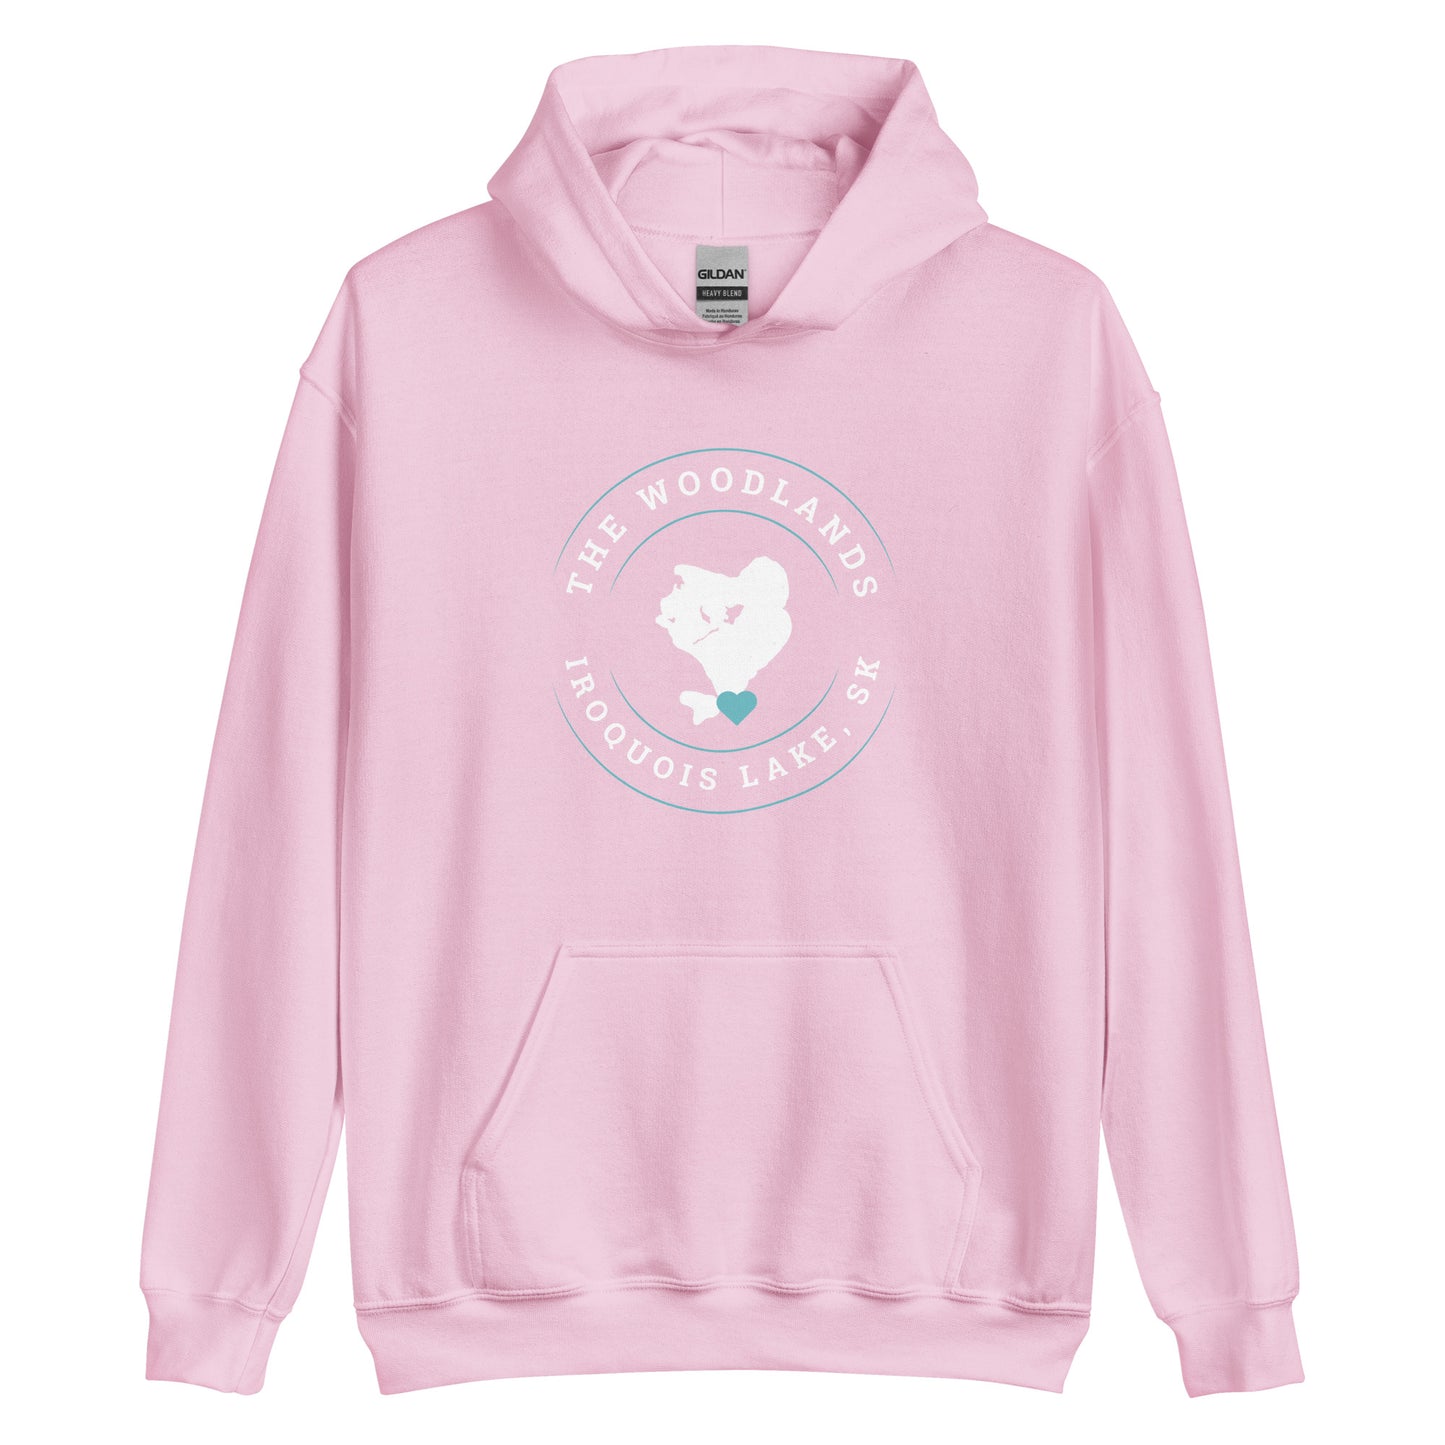 Iroquois Lake, SK - Unisex Hoodie - The Woodlands